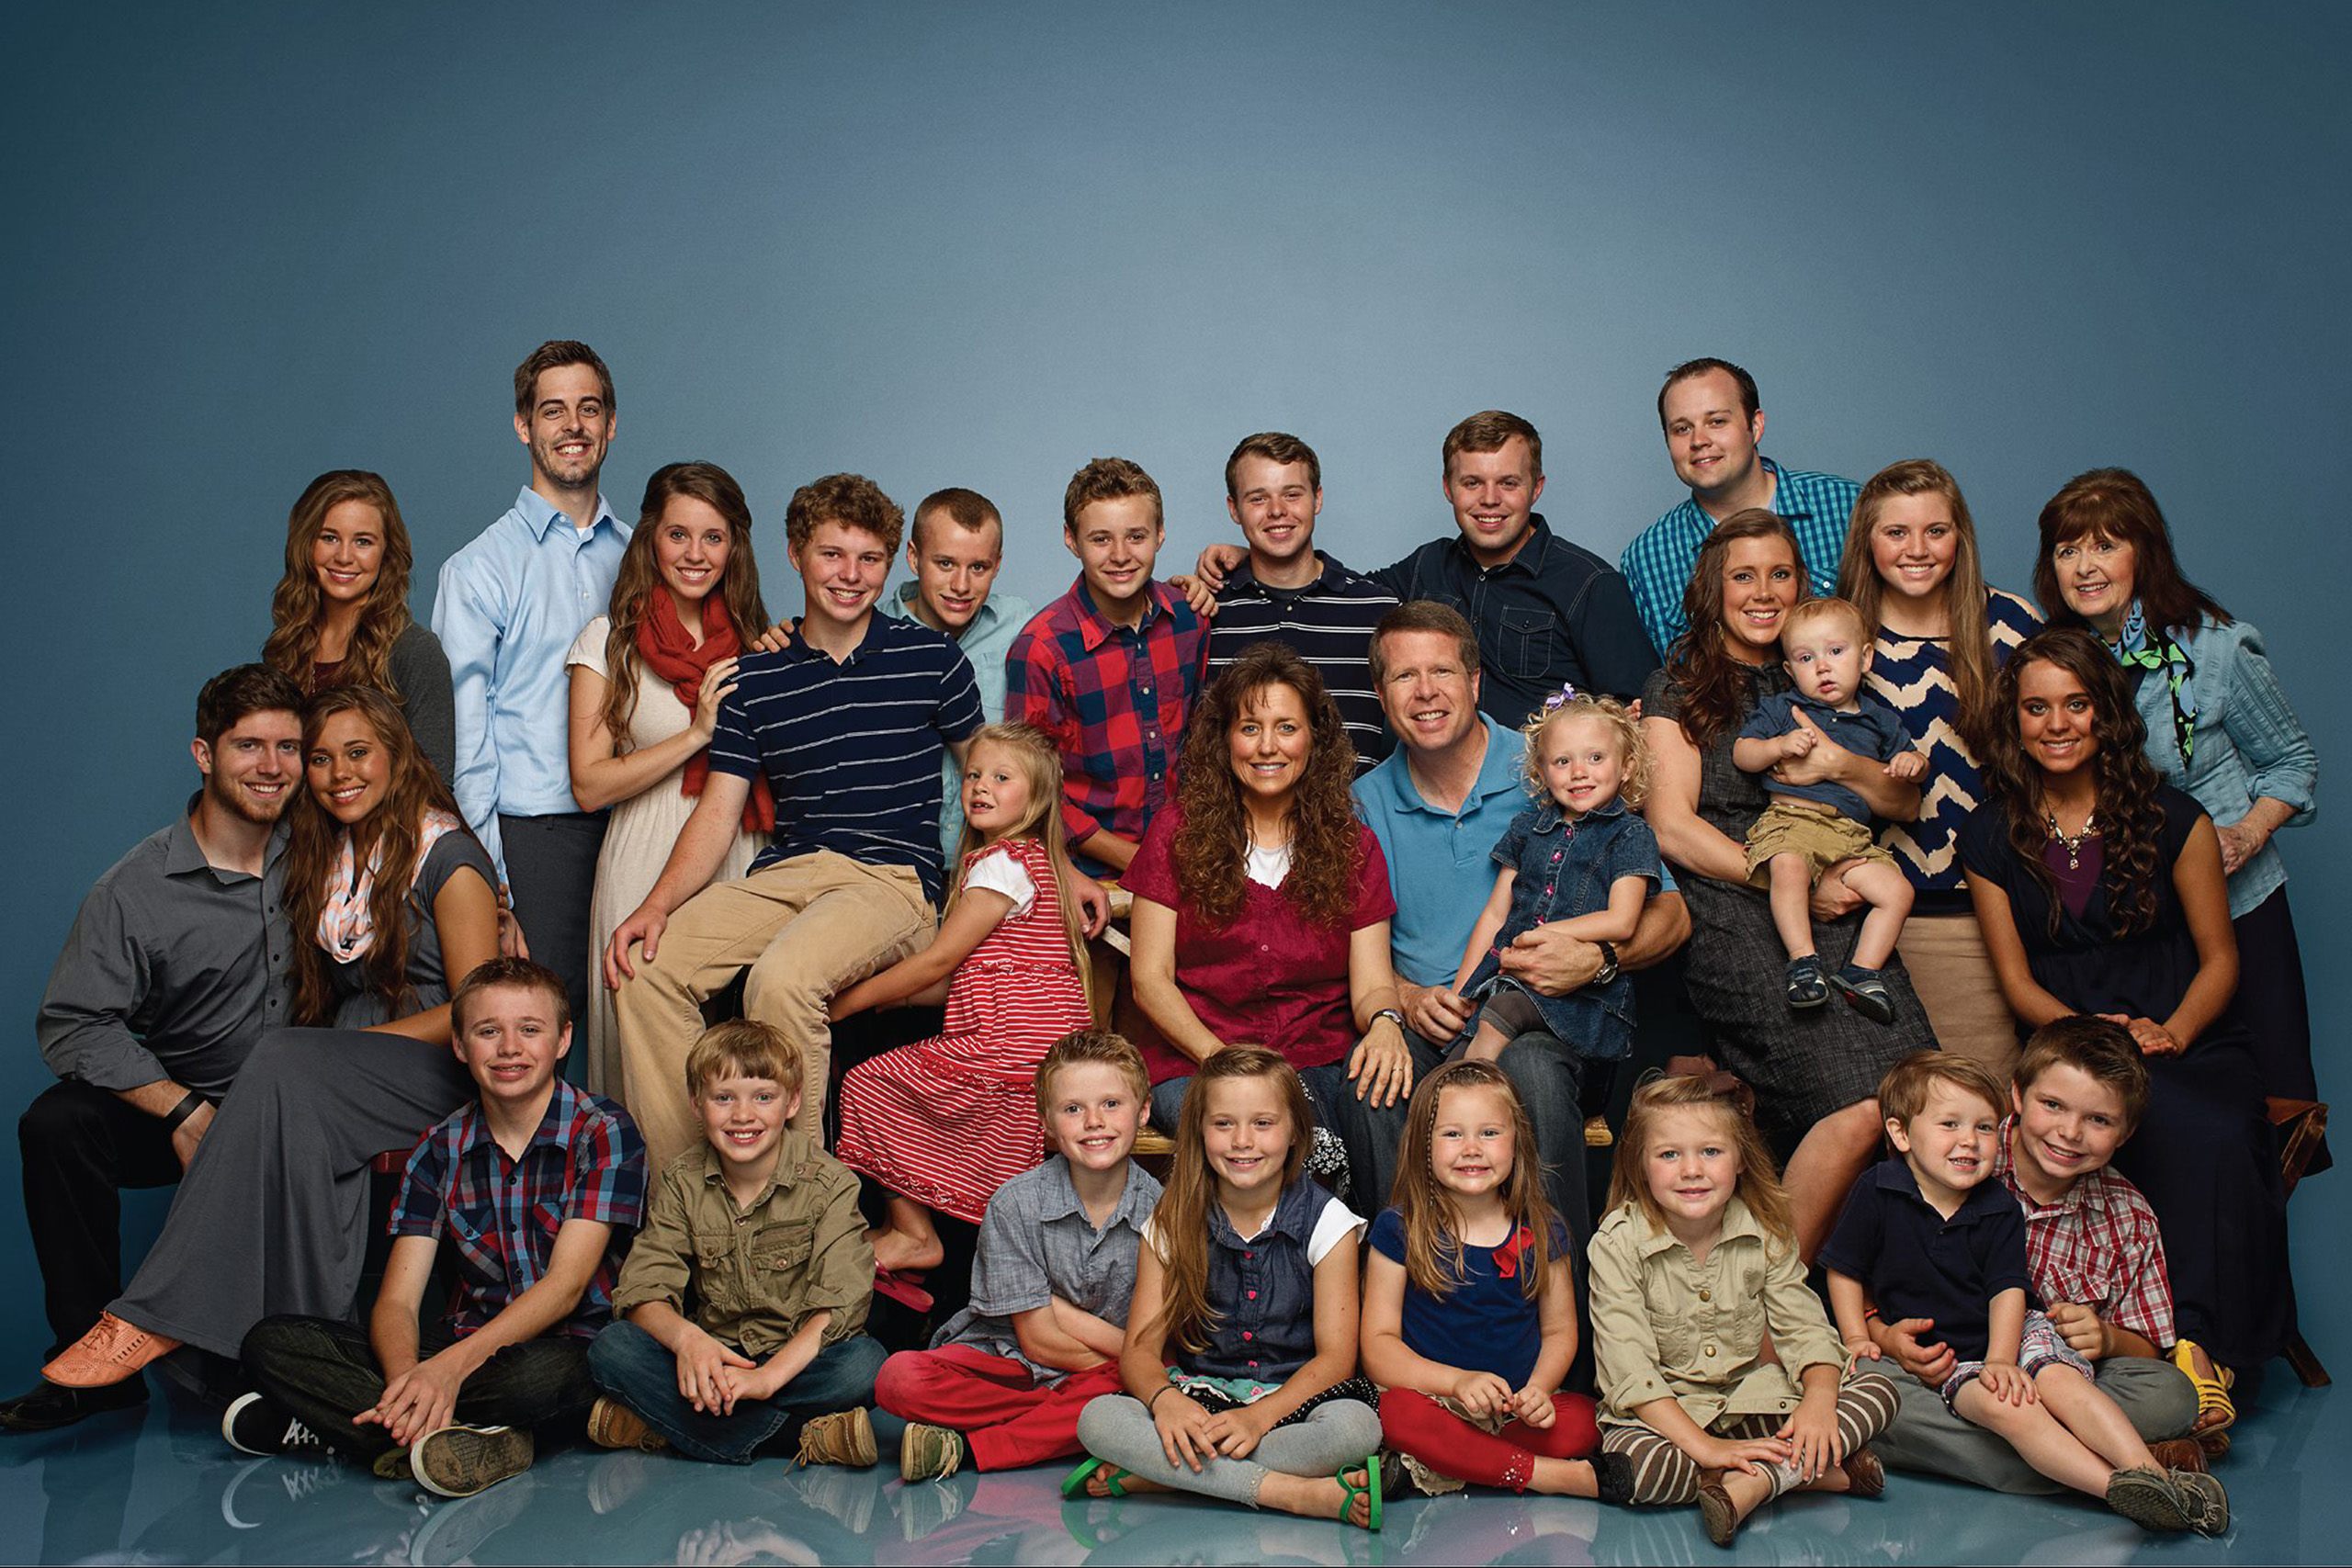 Dark Secrets the Duggar Family Doesn't Want You to Know